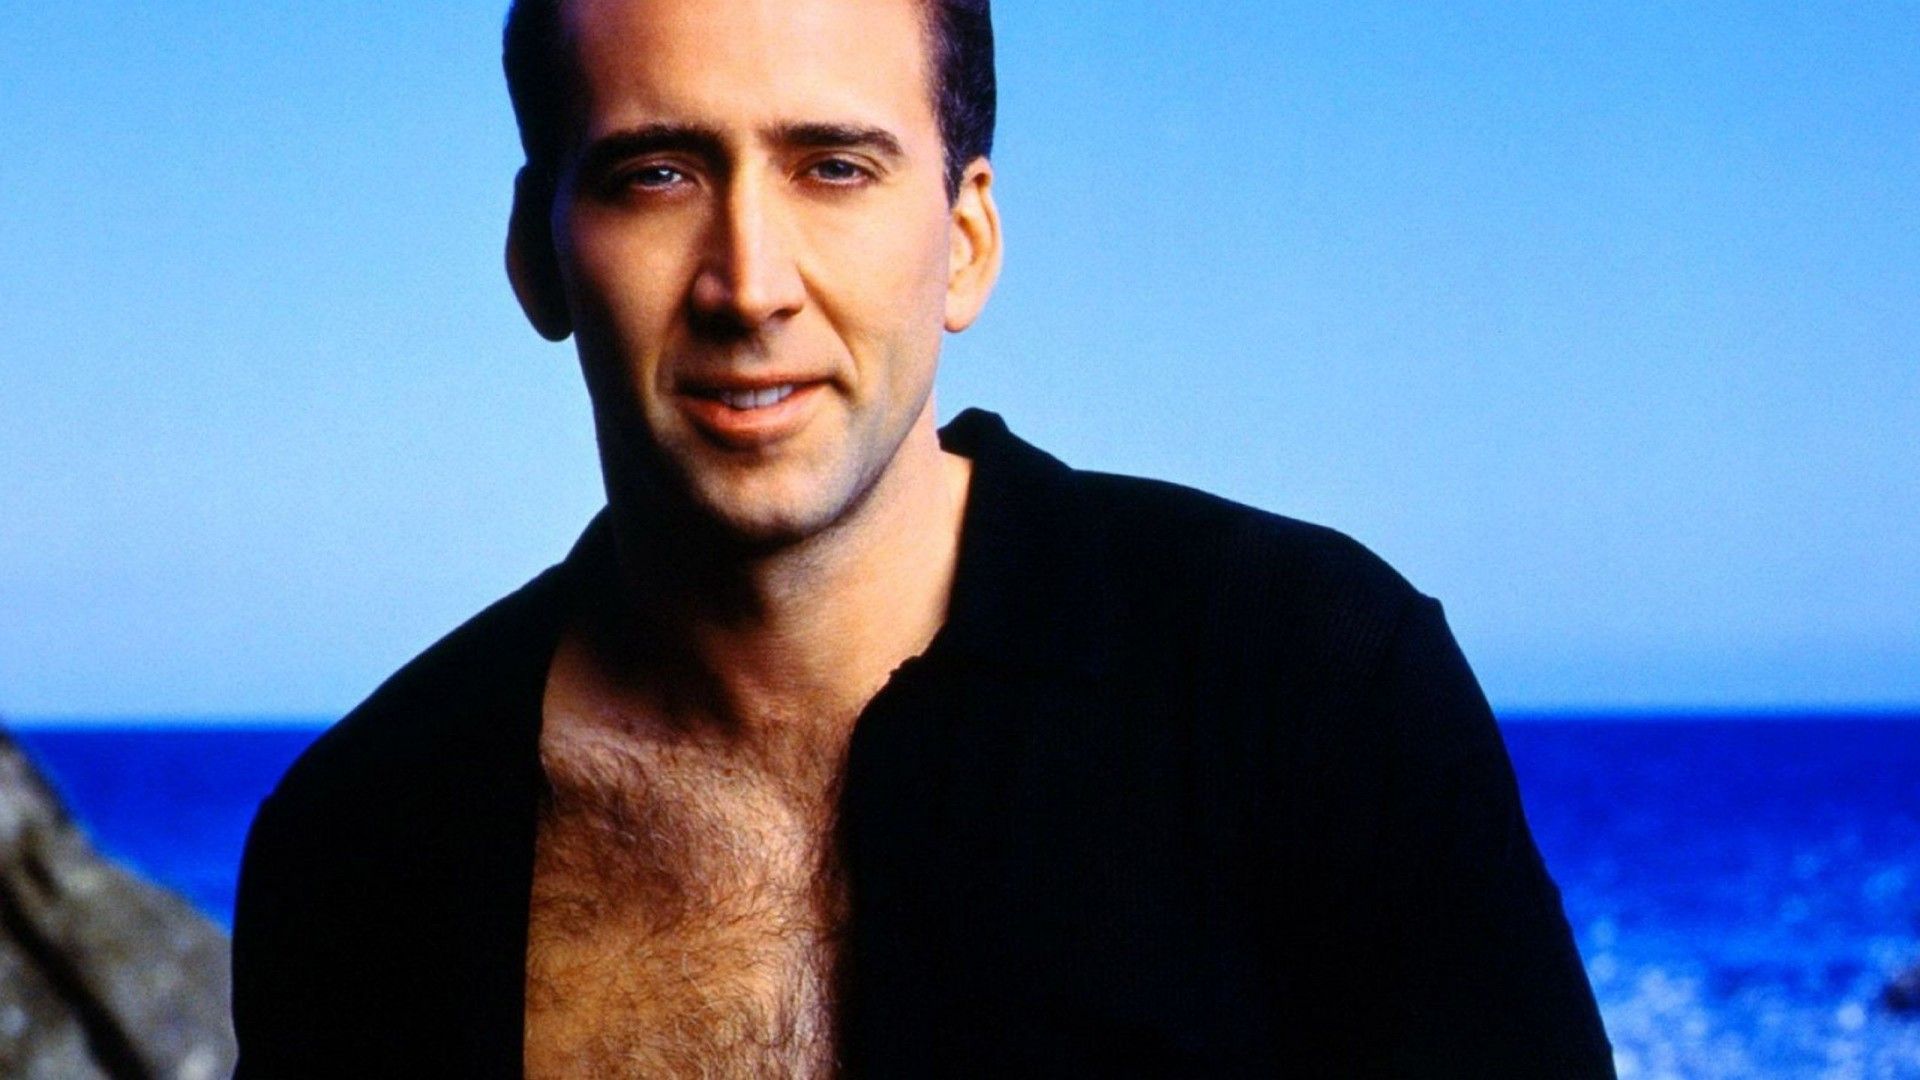 Nicolas Cage Wallpapers High Resolution and Quality Download